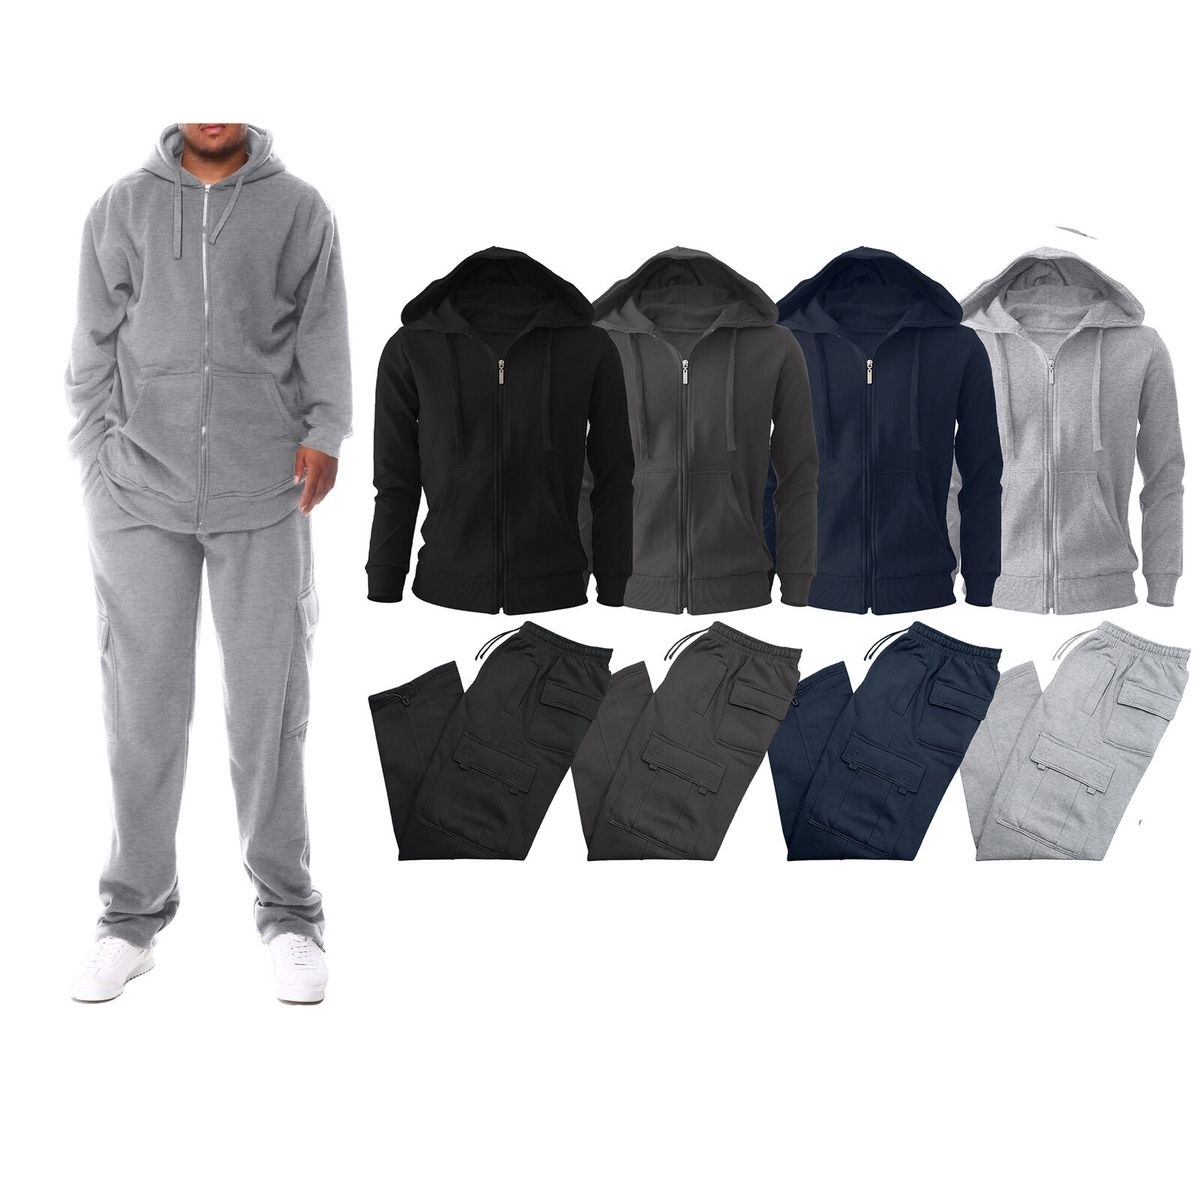 Multi-Pack: Men's Big & Tall Winter Warm Athletic Active Cozy Fleece Lined Multi-Pocket Full Zip Up Cargo Tracksuit - Charcoal, 1-pack, X-la